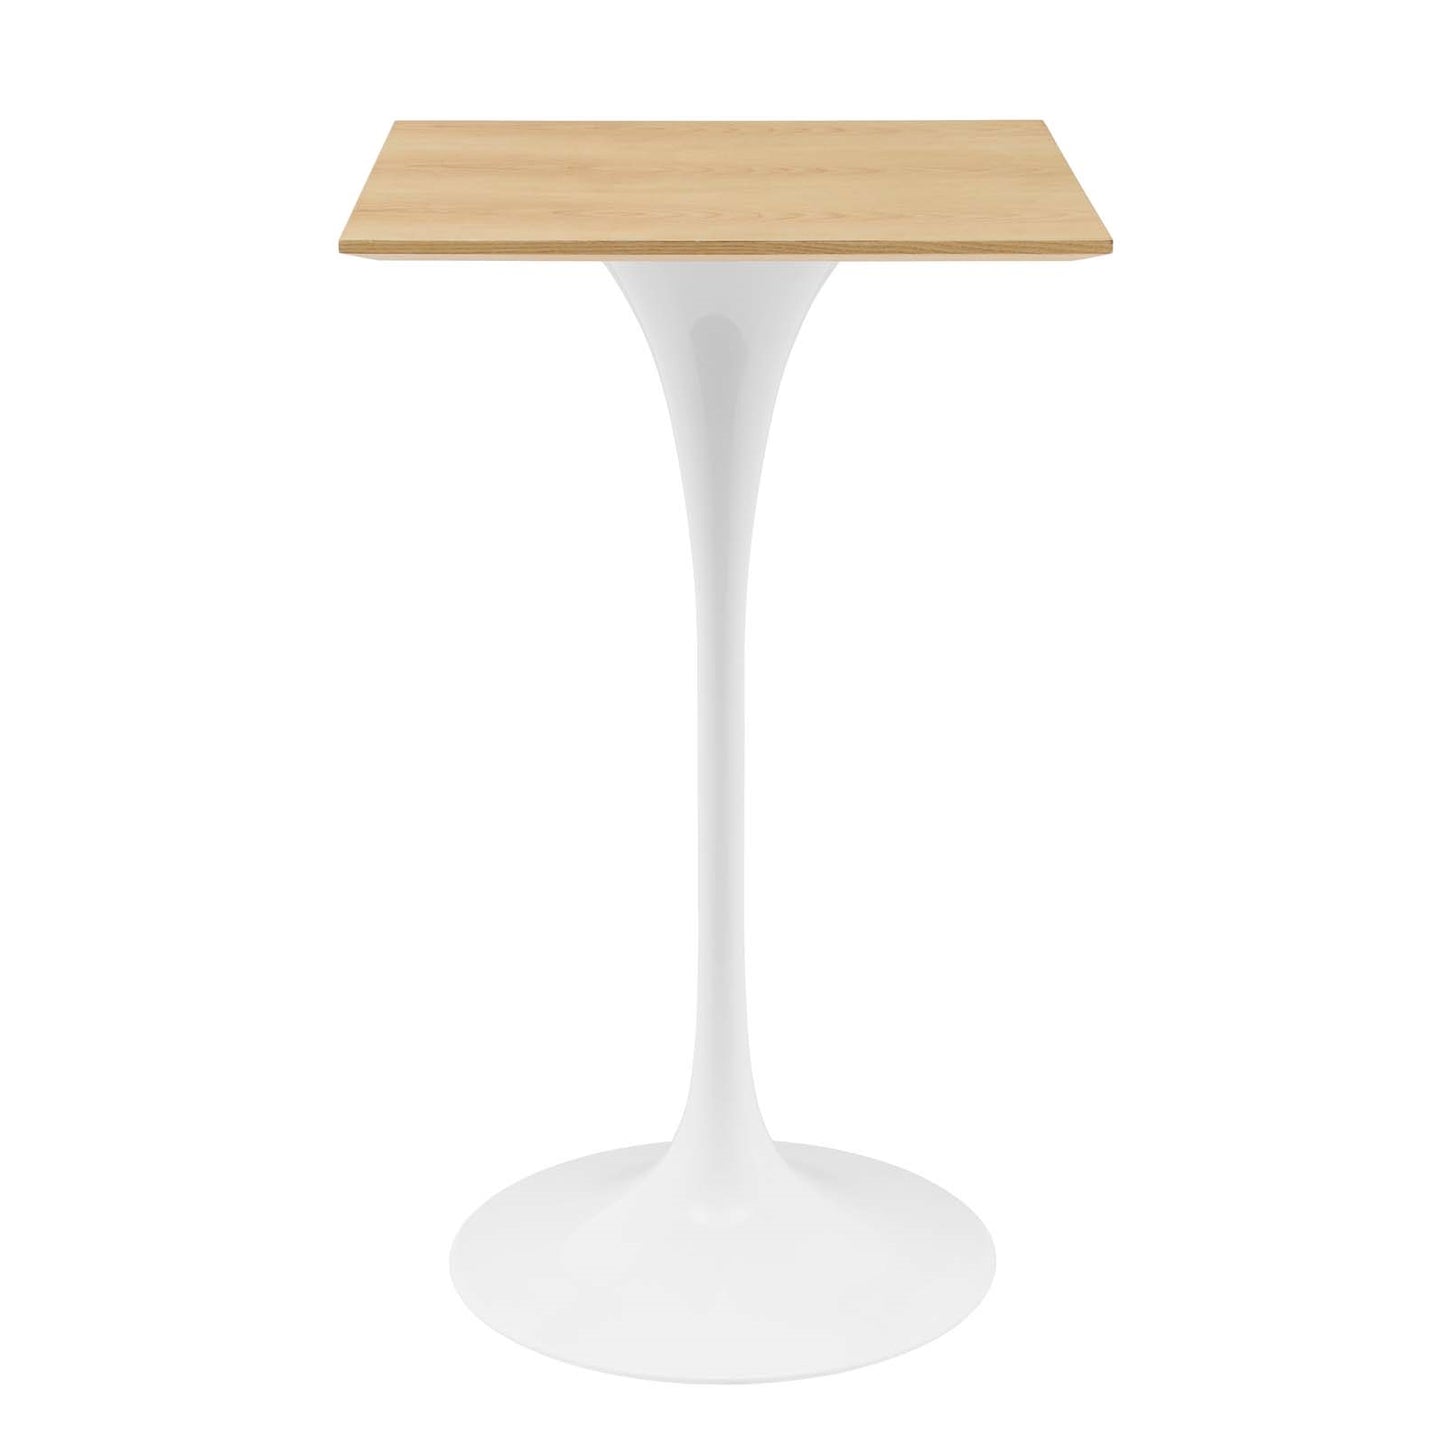 Tulip Style 28" Natural Wood Square Bar Table